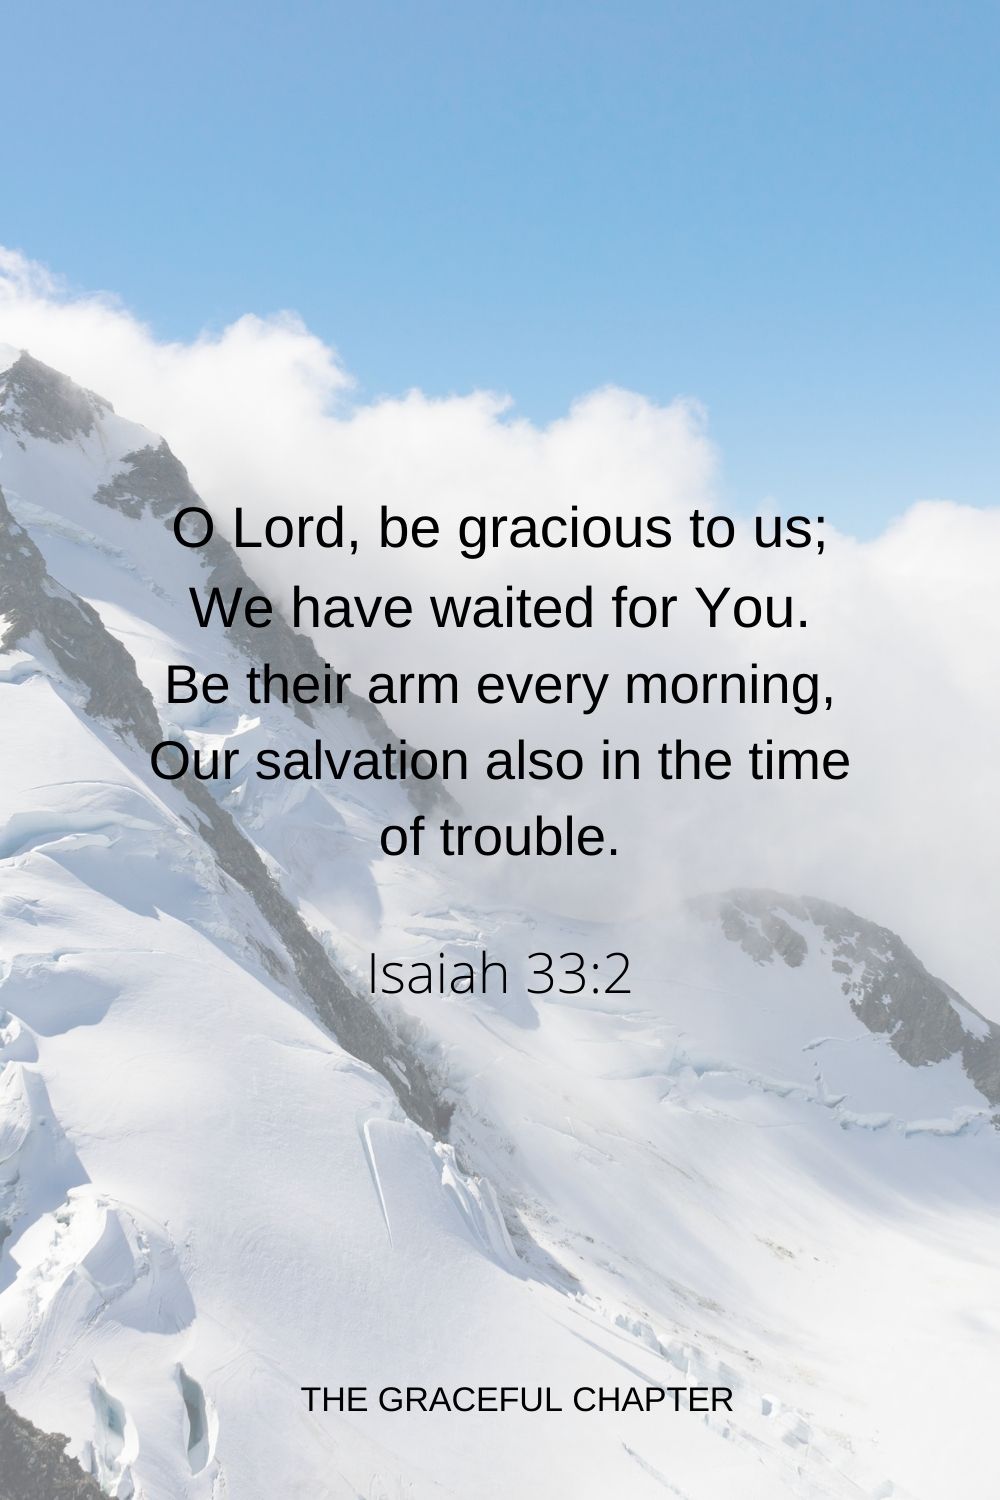 O Lord, be gracious to us; We have waited for You. Be their arm every morning, Our salvation also in the time of trouble. Isaiah 33:2